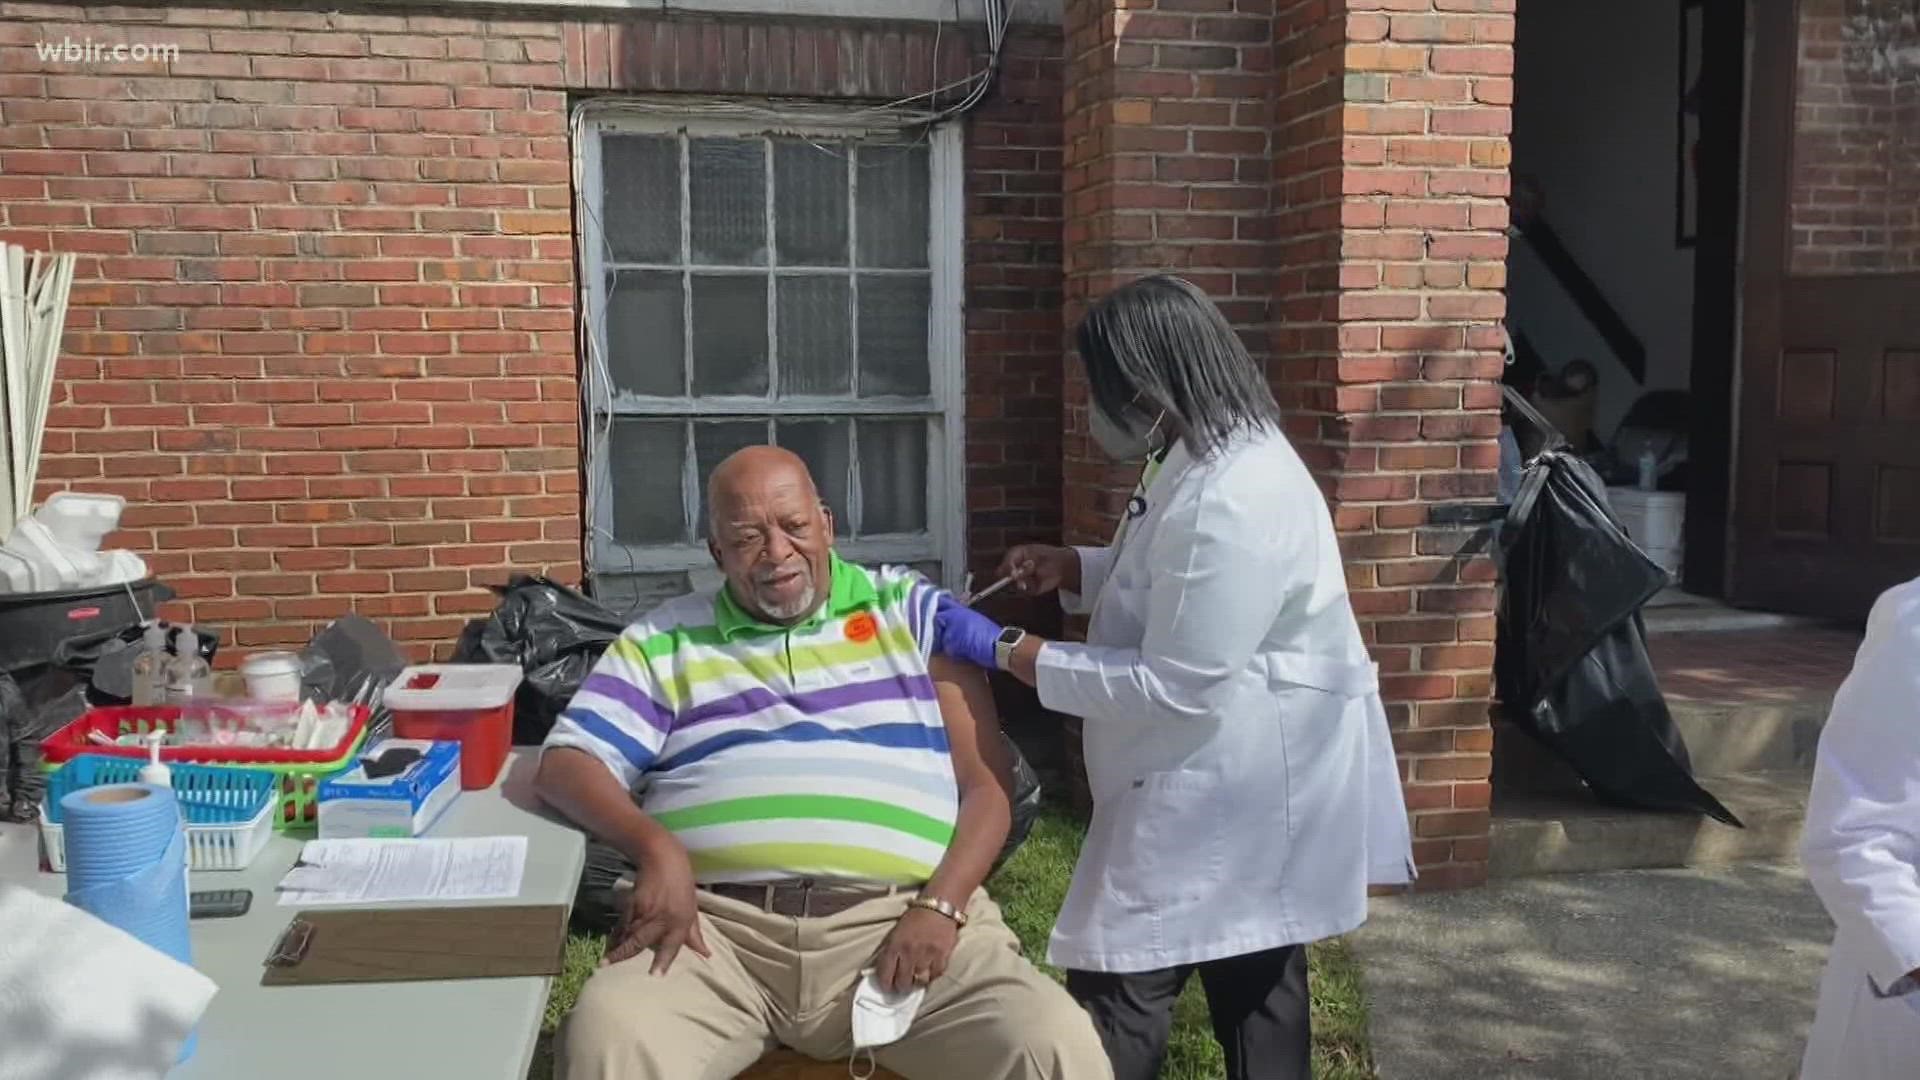 Roughly 32 percent of Black people in Knox County are vaccinated. Community leaders are looking to boost those numbers up.